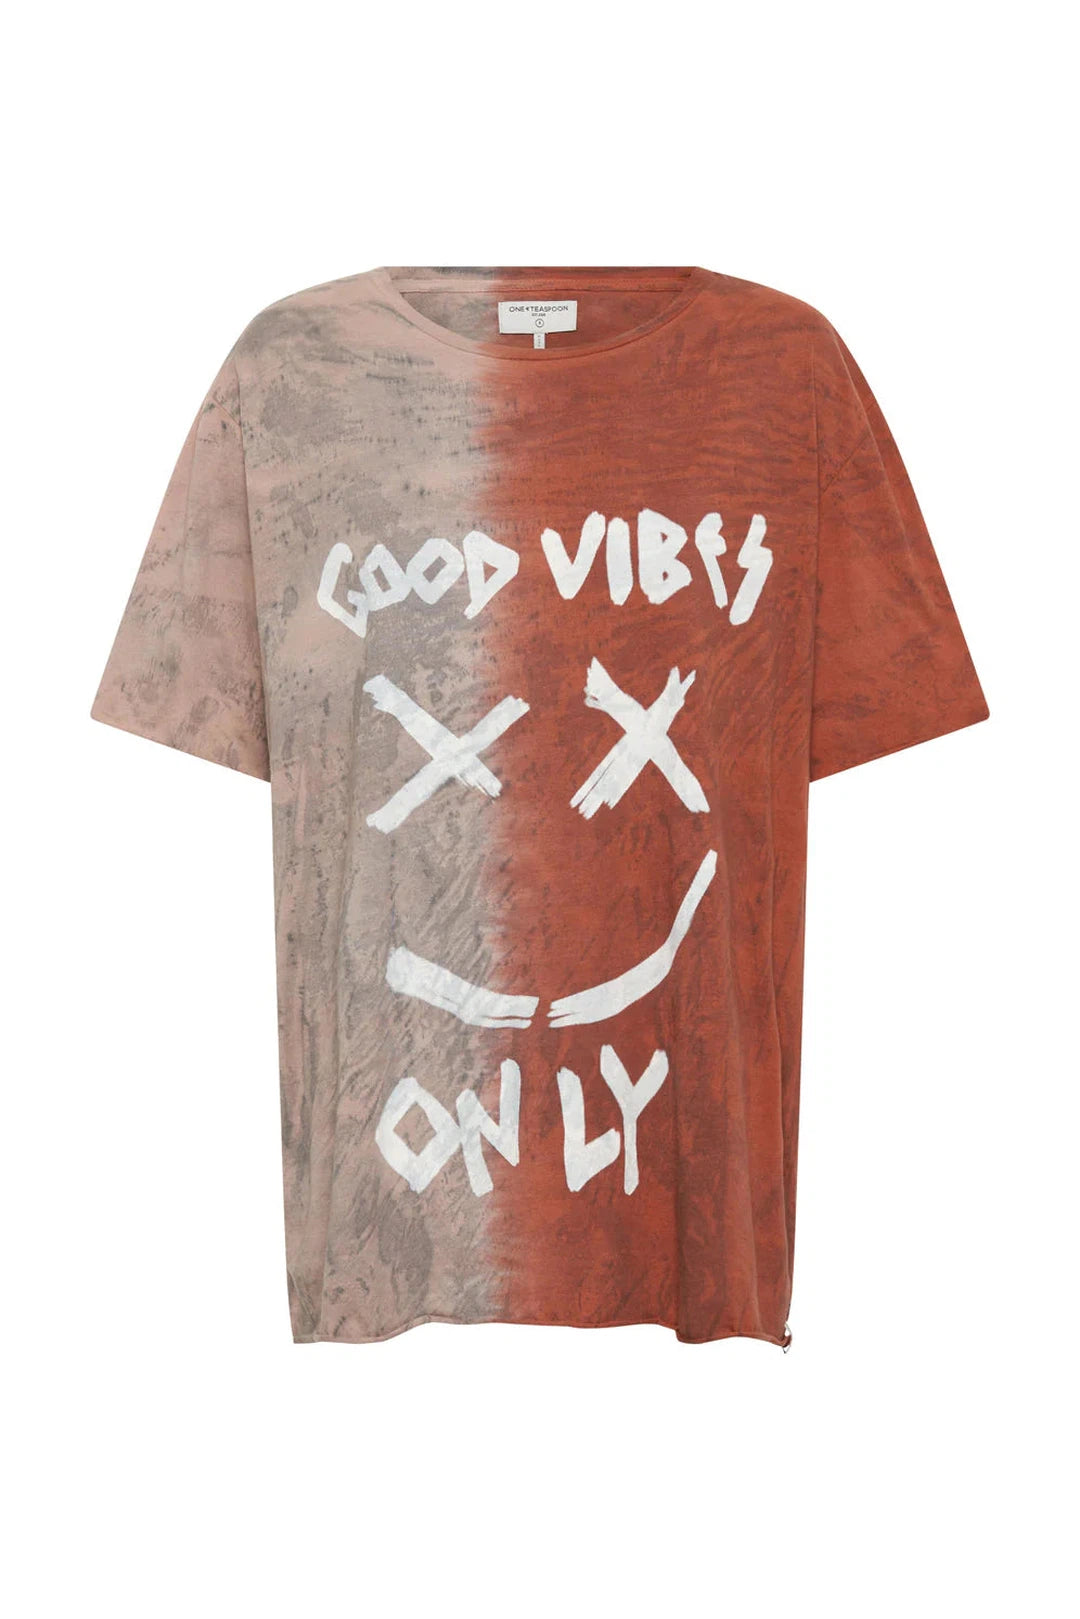 Good vibes only oversized hand dyed tee